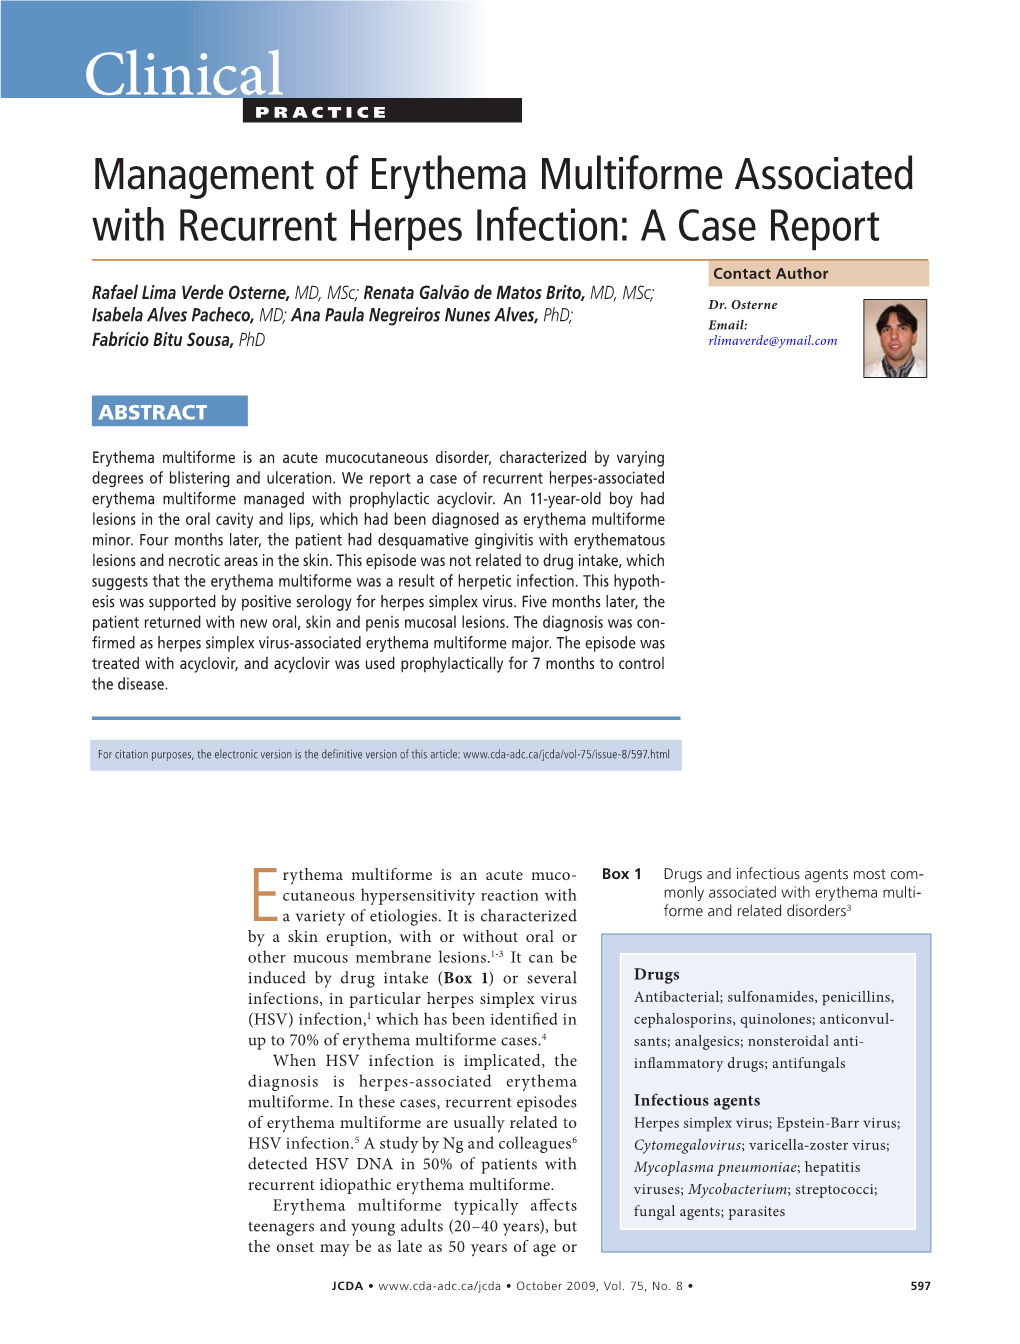 Management of Erythema Multiforme Associated with Recurrent Herpes Infection: a Case Report